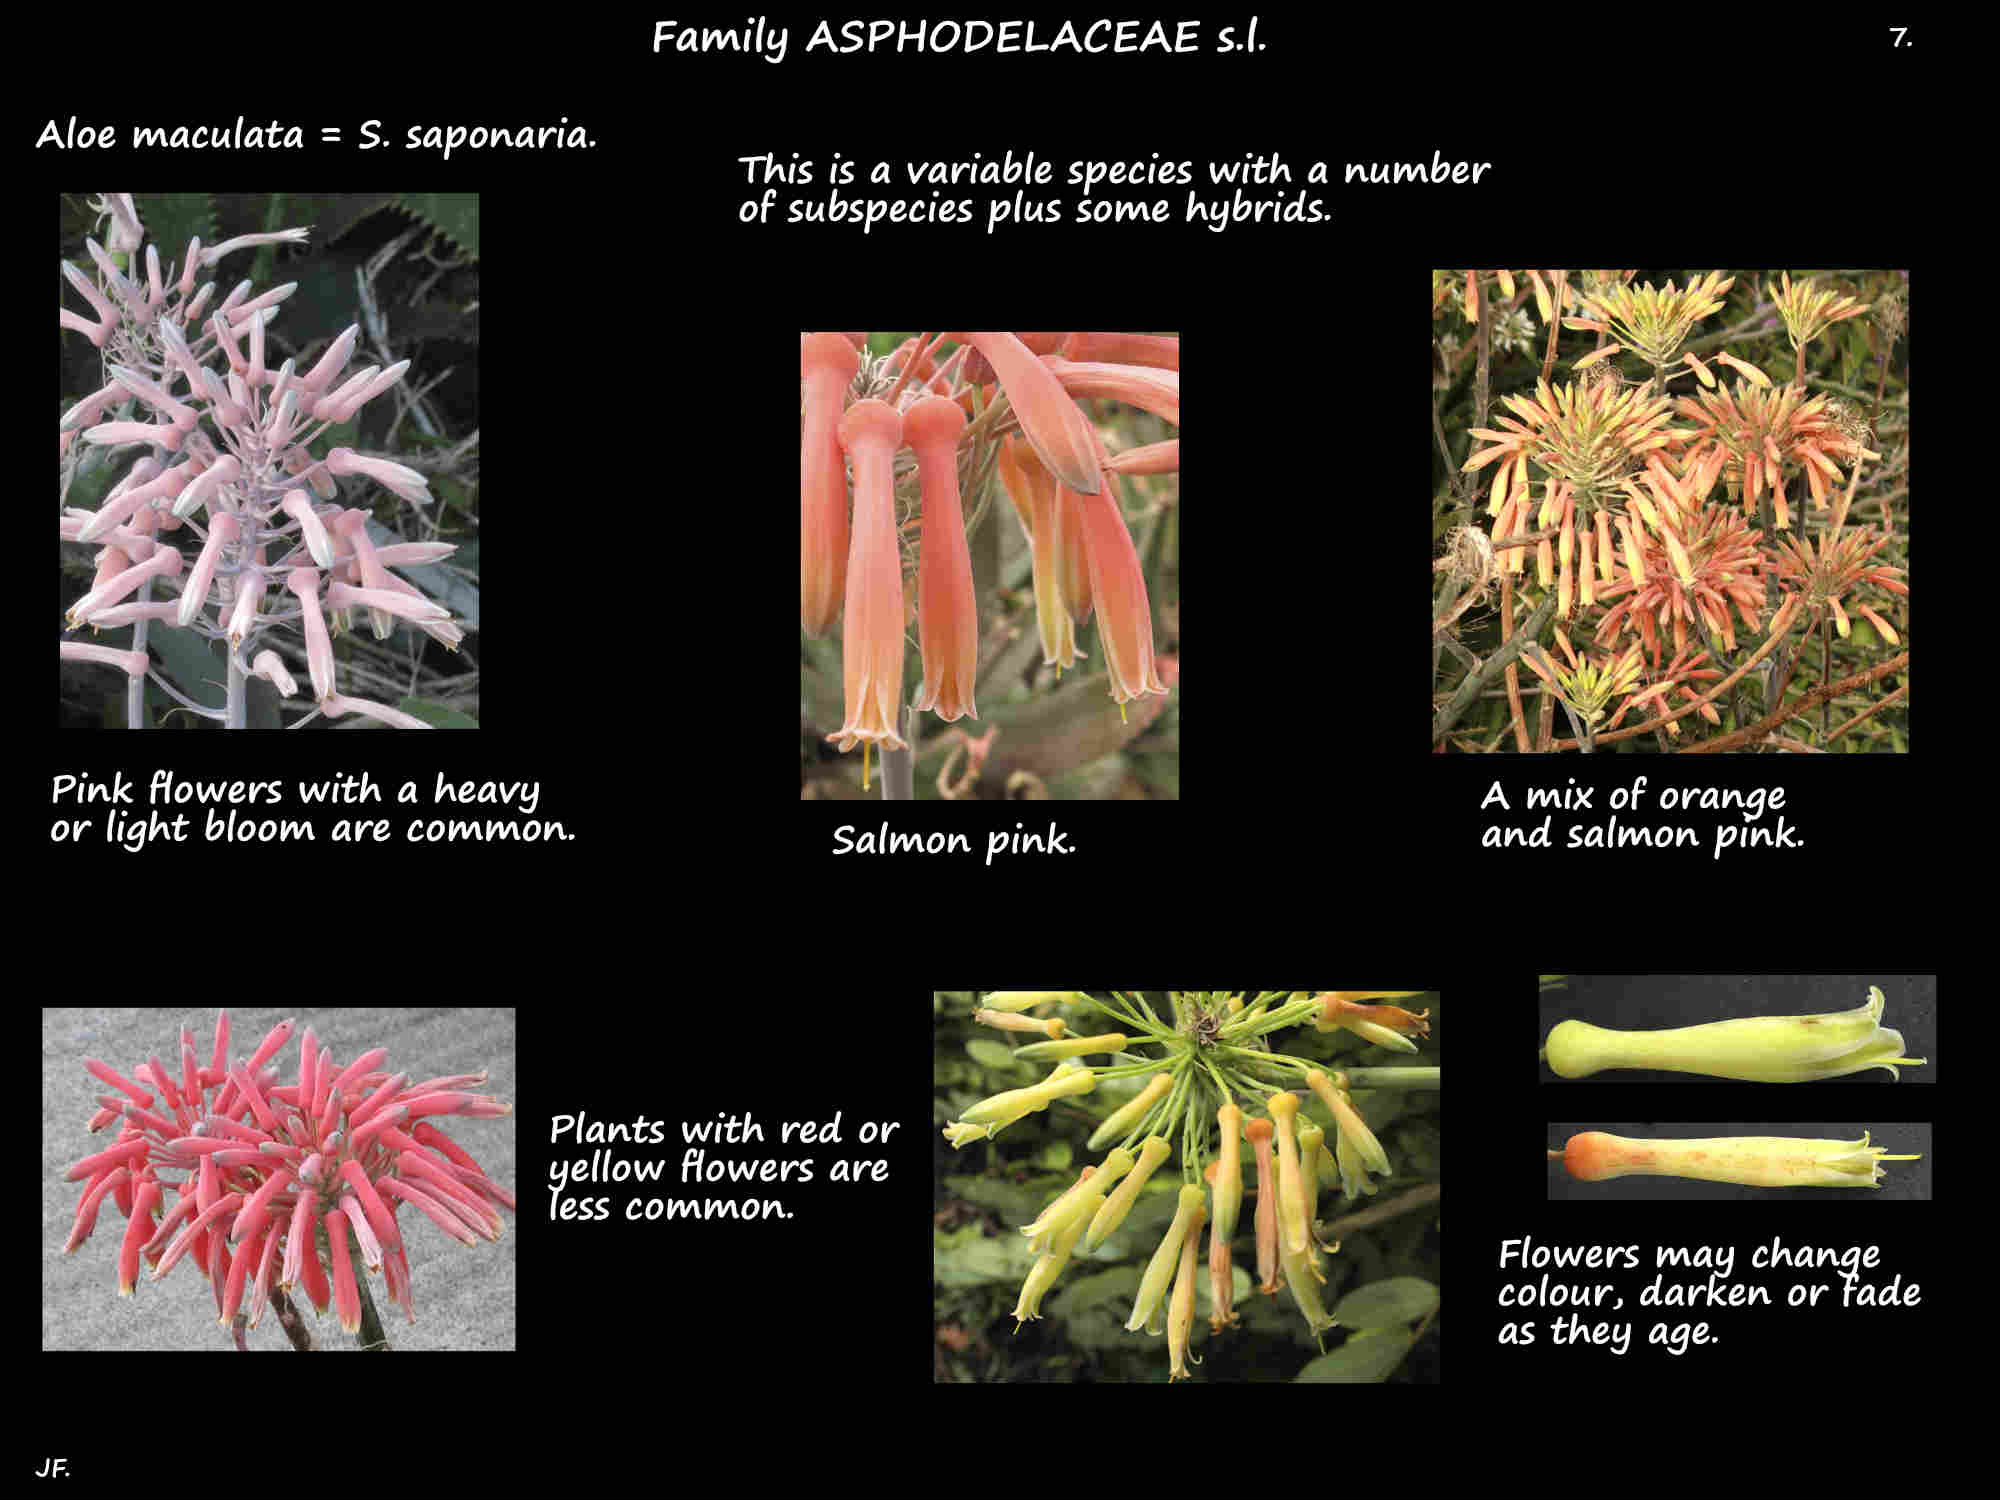 7 The variable colours of Aloe maculata flowers